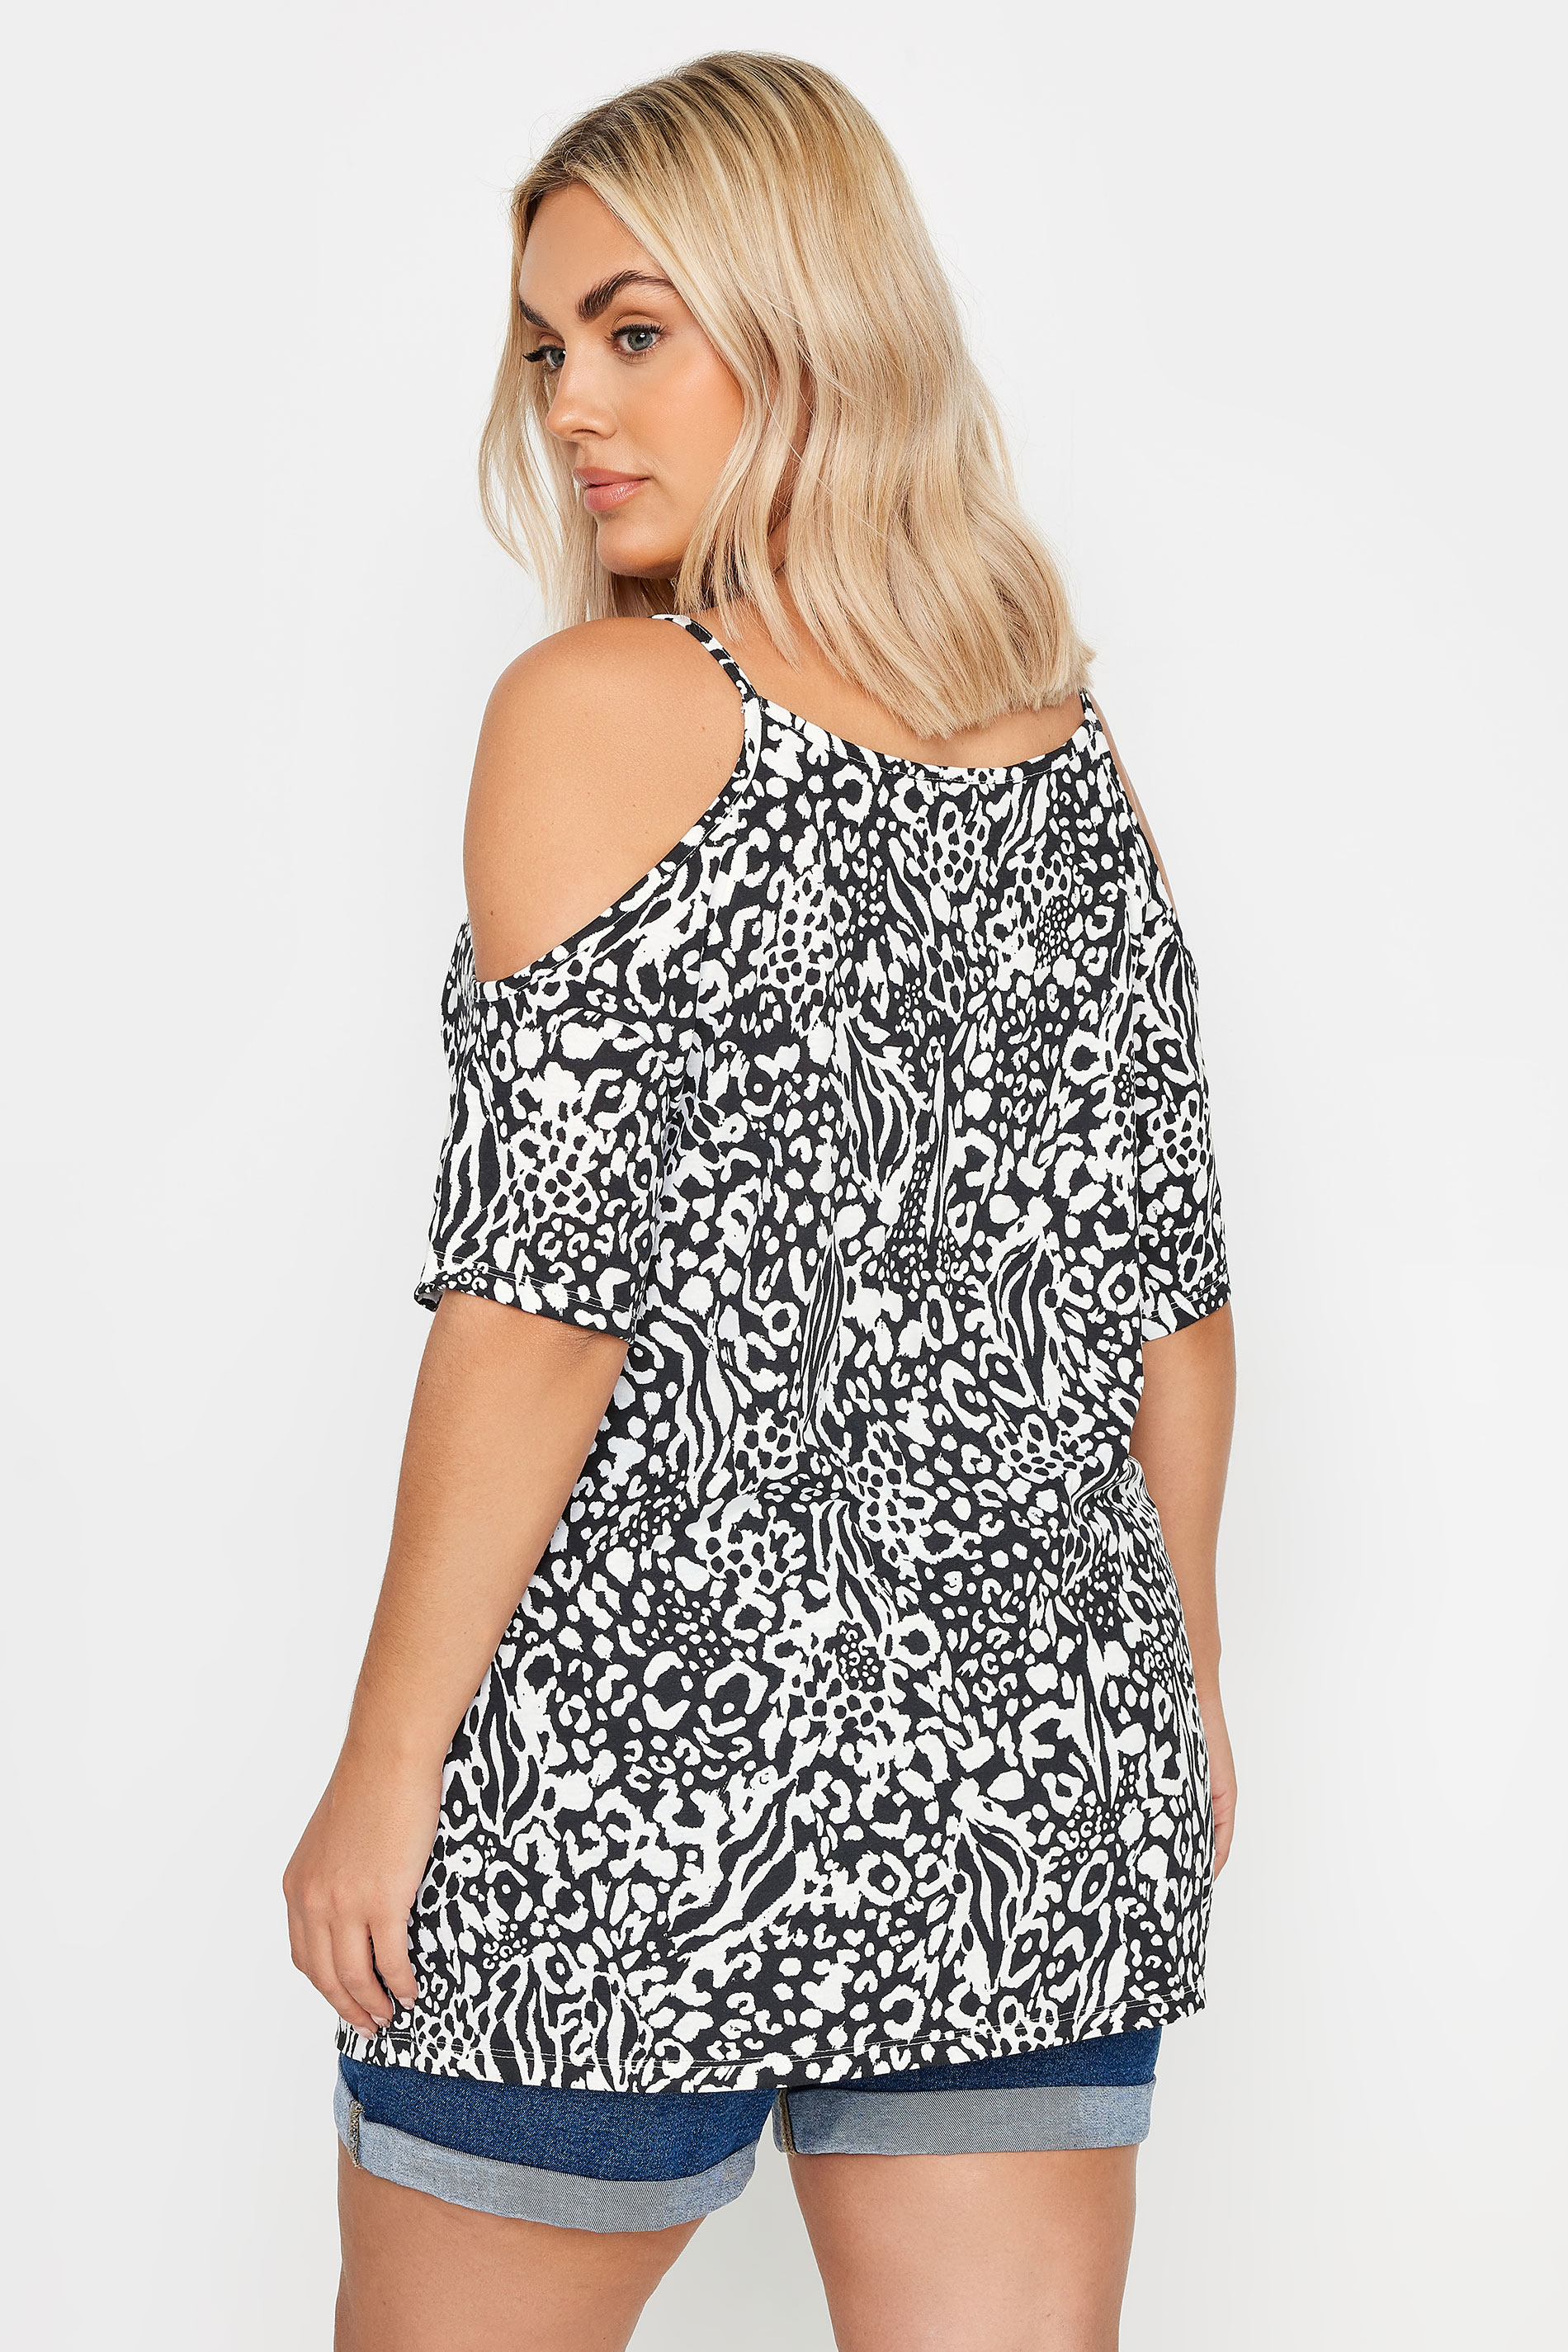 YOURS Plus Size Black & White Mixed Animal Print Cold Shoulder Top | Yours Clothing 3